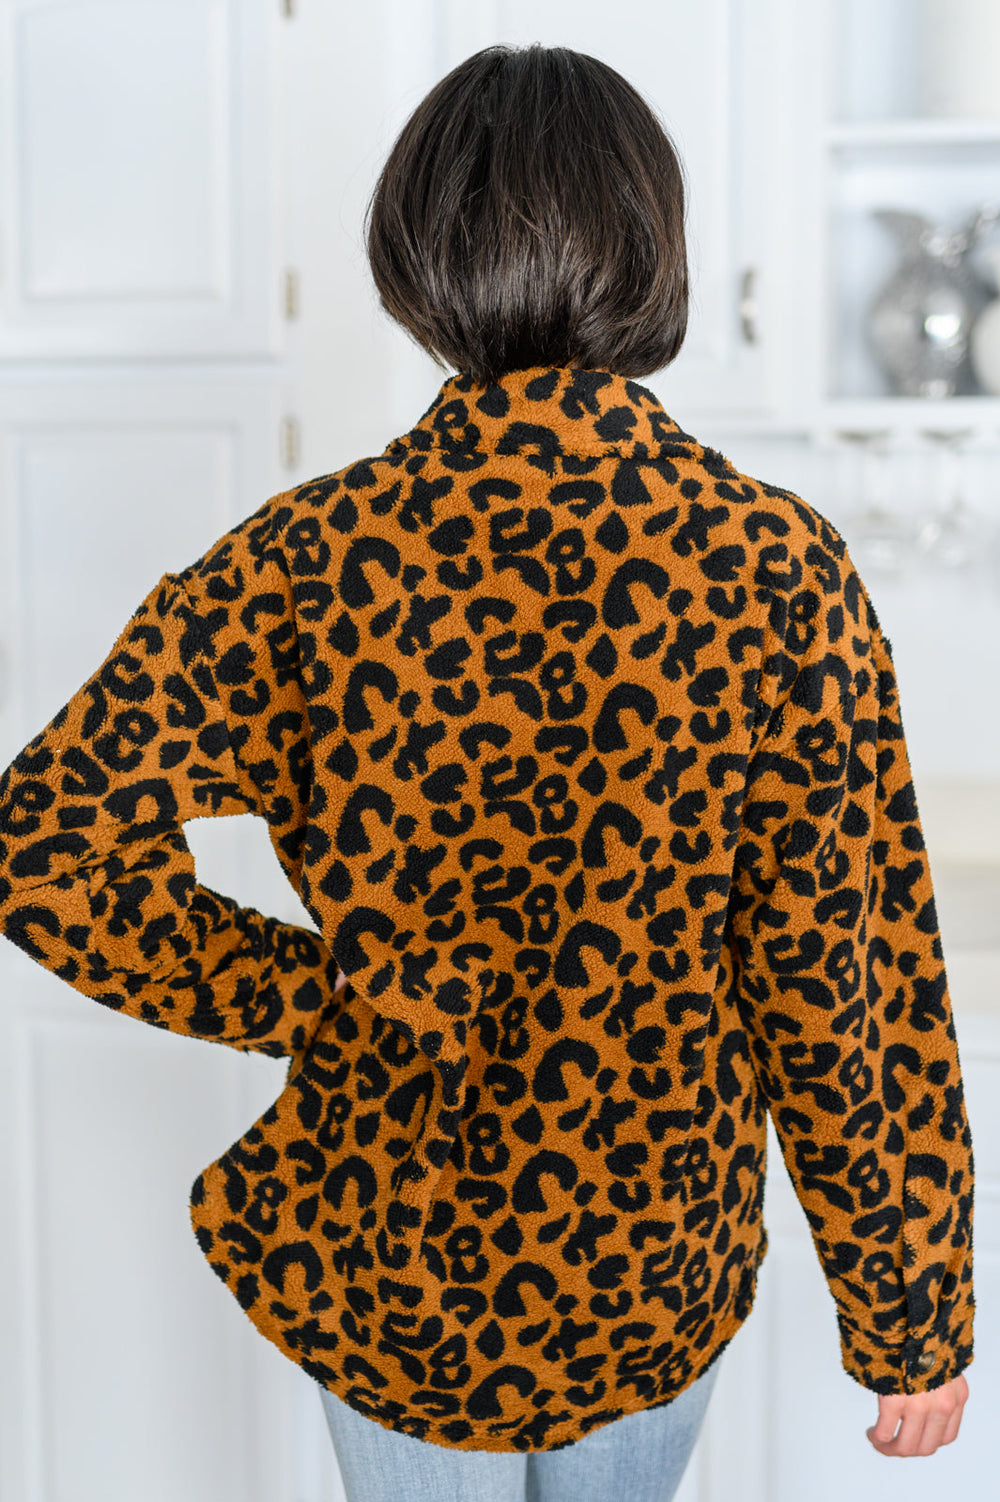 Castle Spotting Animal Print Jacket-Outerwear-Inspired by Justeen-Women's Clothing Boutique in Chicago, Illinois